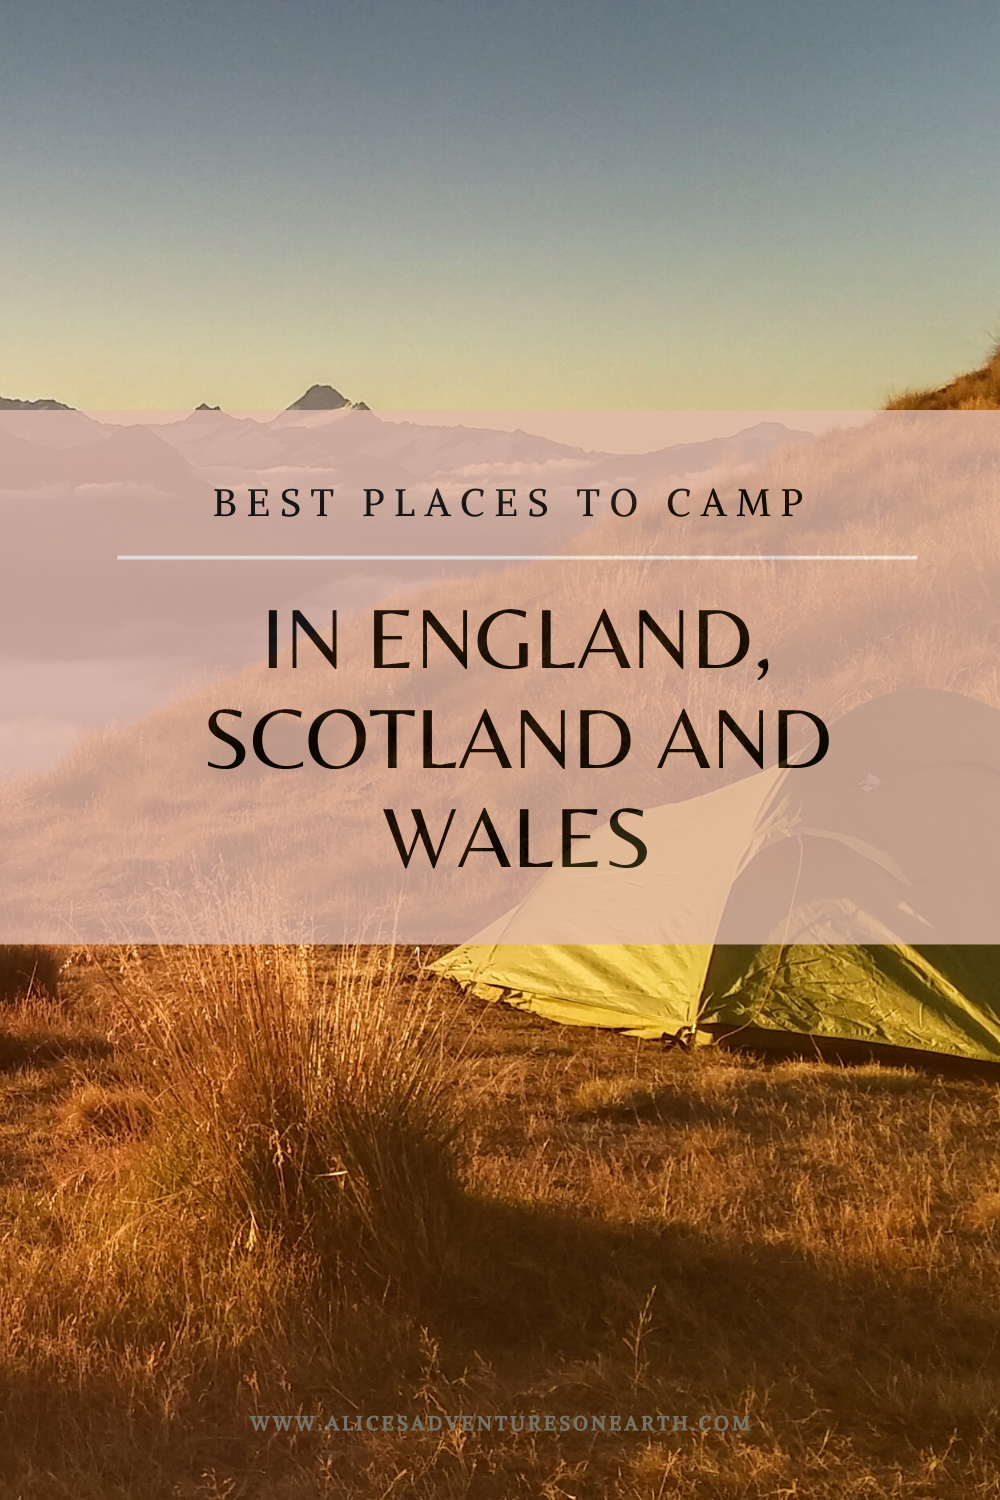 Three of the best places to camp across the uk, wales, england and scotland. #Camping #travel #backpacking